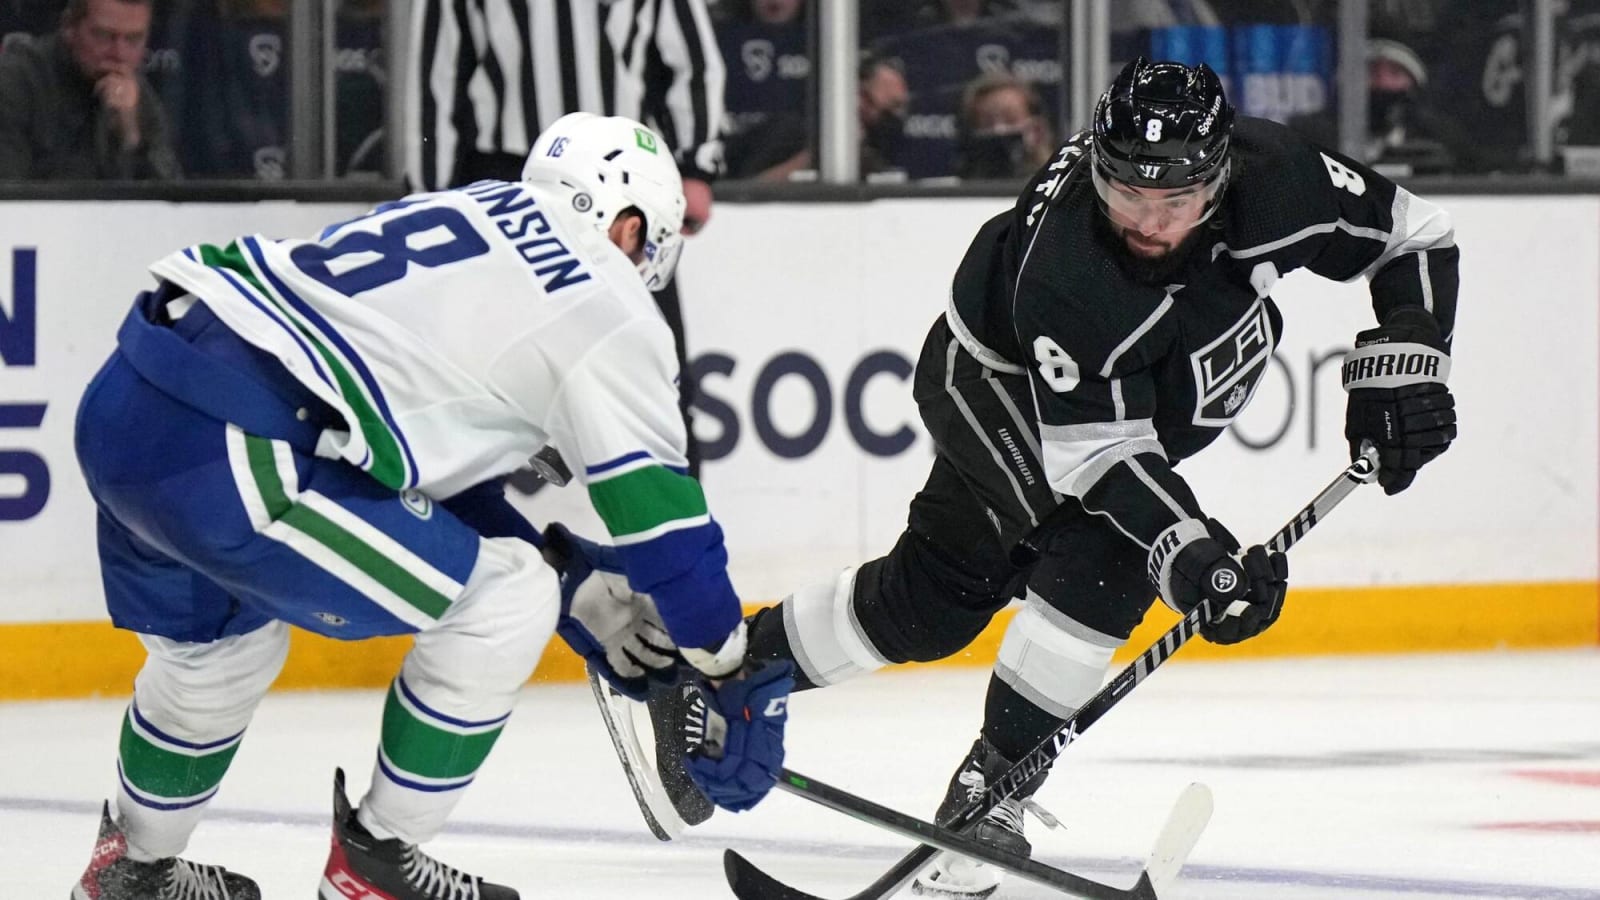 The Los Angeles Kings improved and will challenge the Canucks this season: Previewing the Pacific